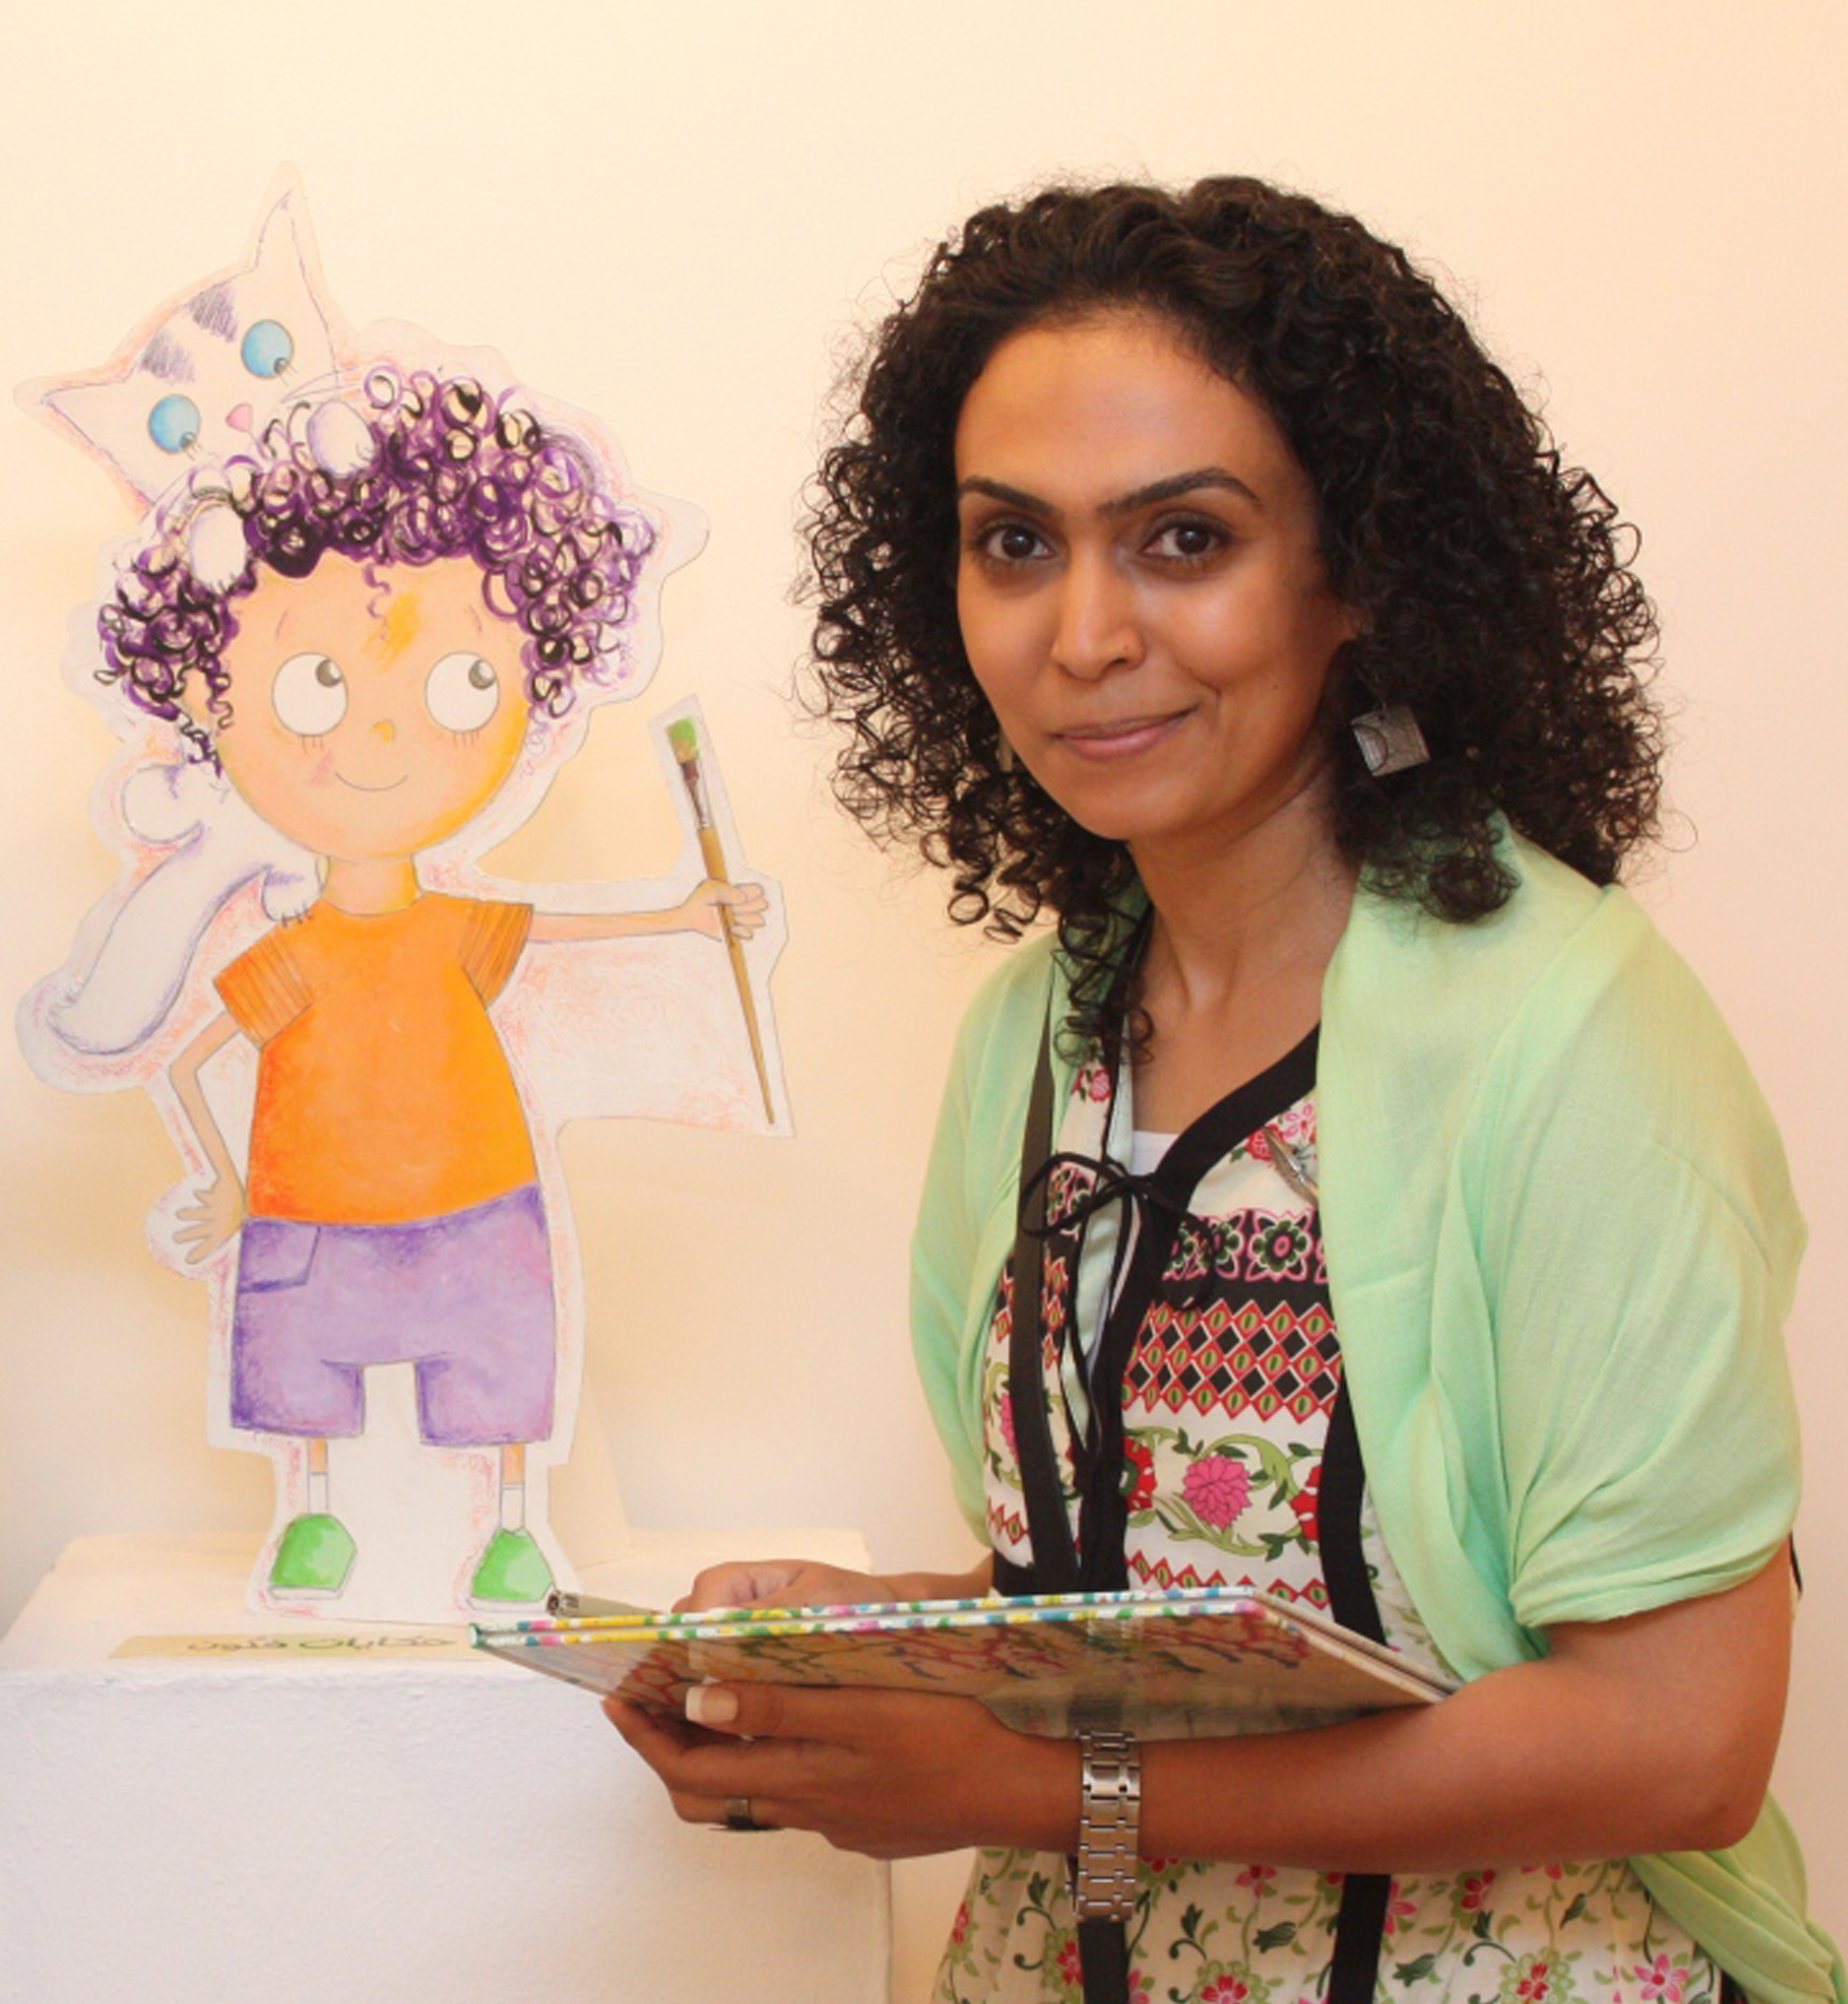 Image of woman in front of illustration of boy. Woman is reading a book.